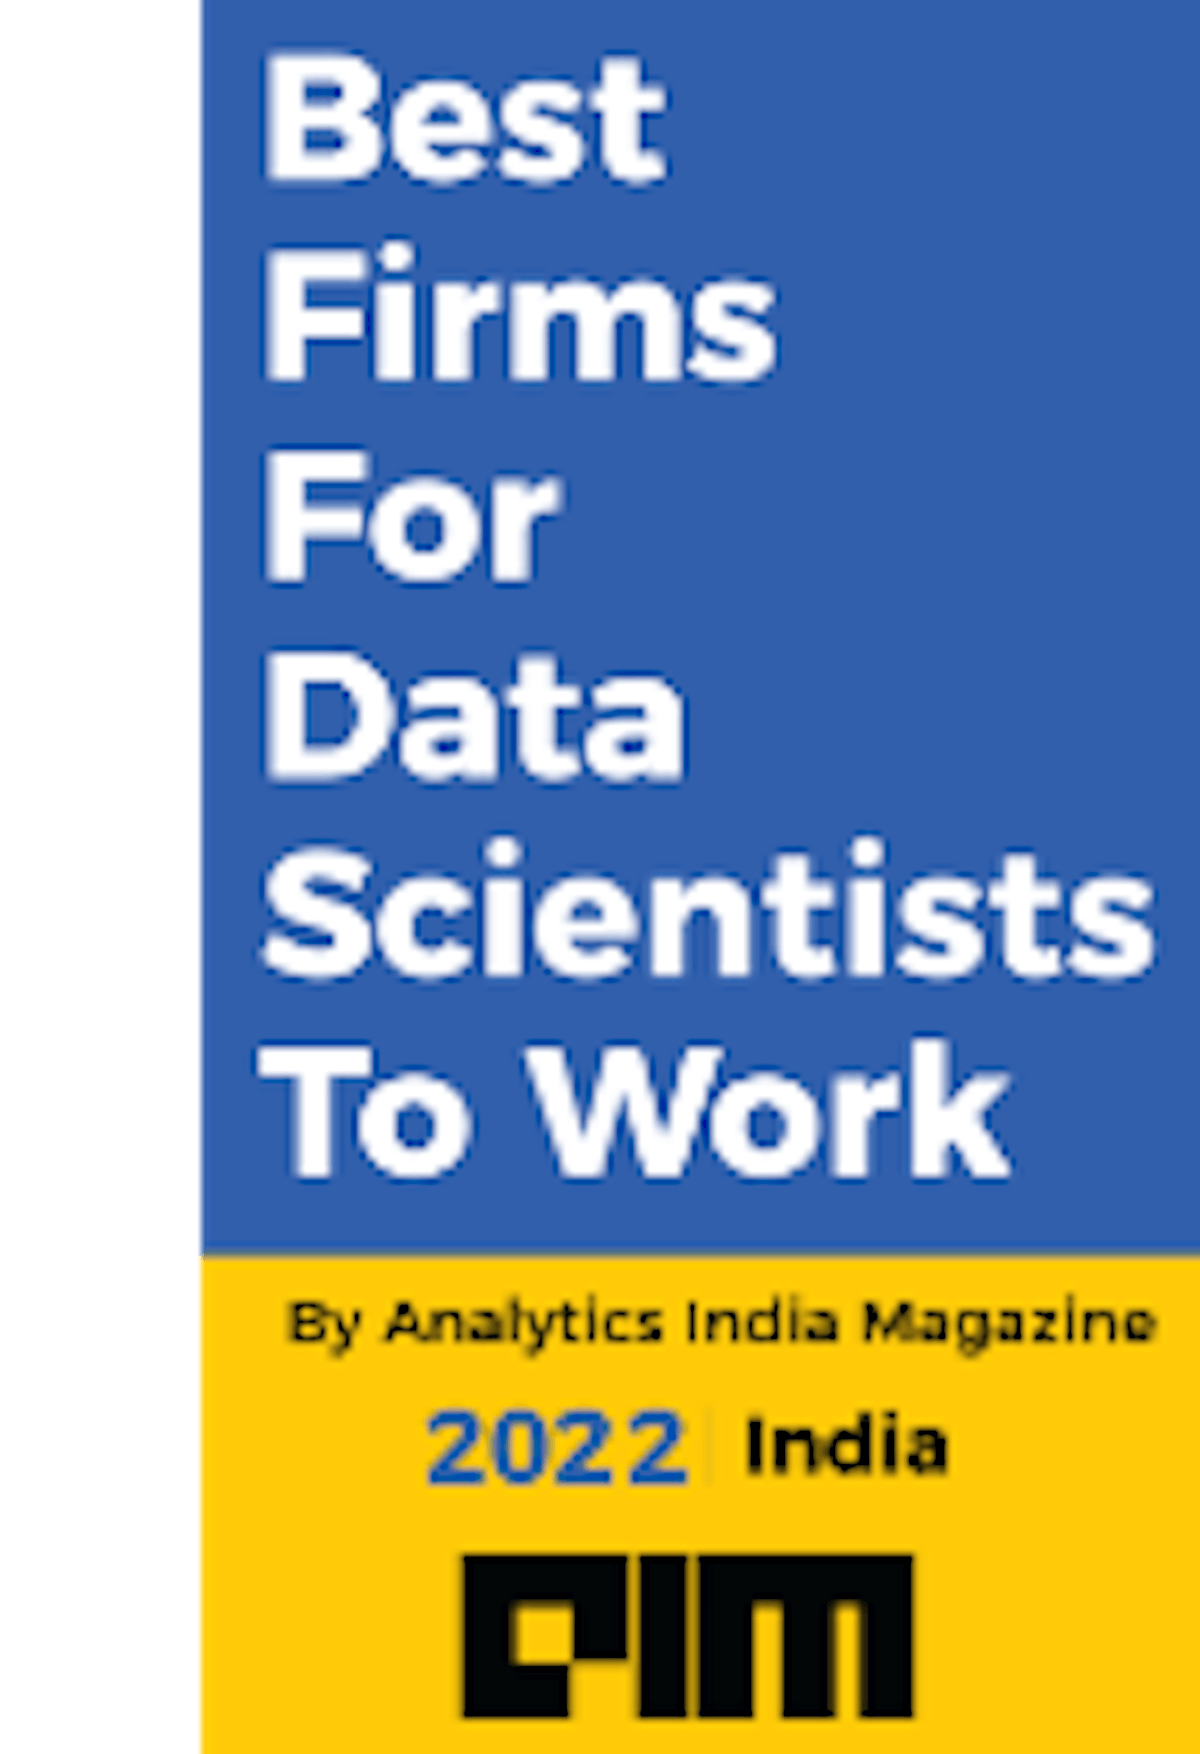 Best Firms For Data Scientists Badge 2022